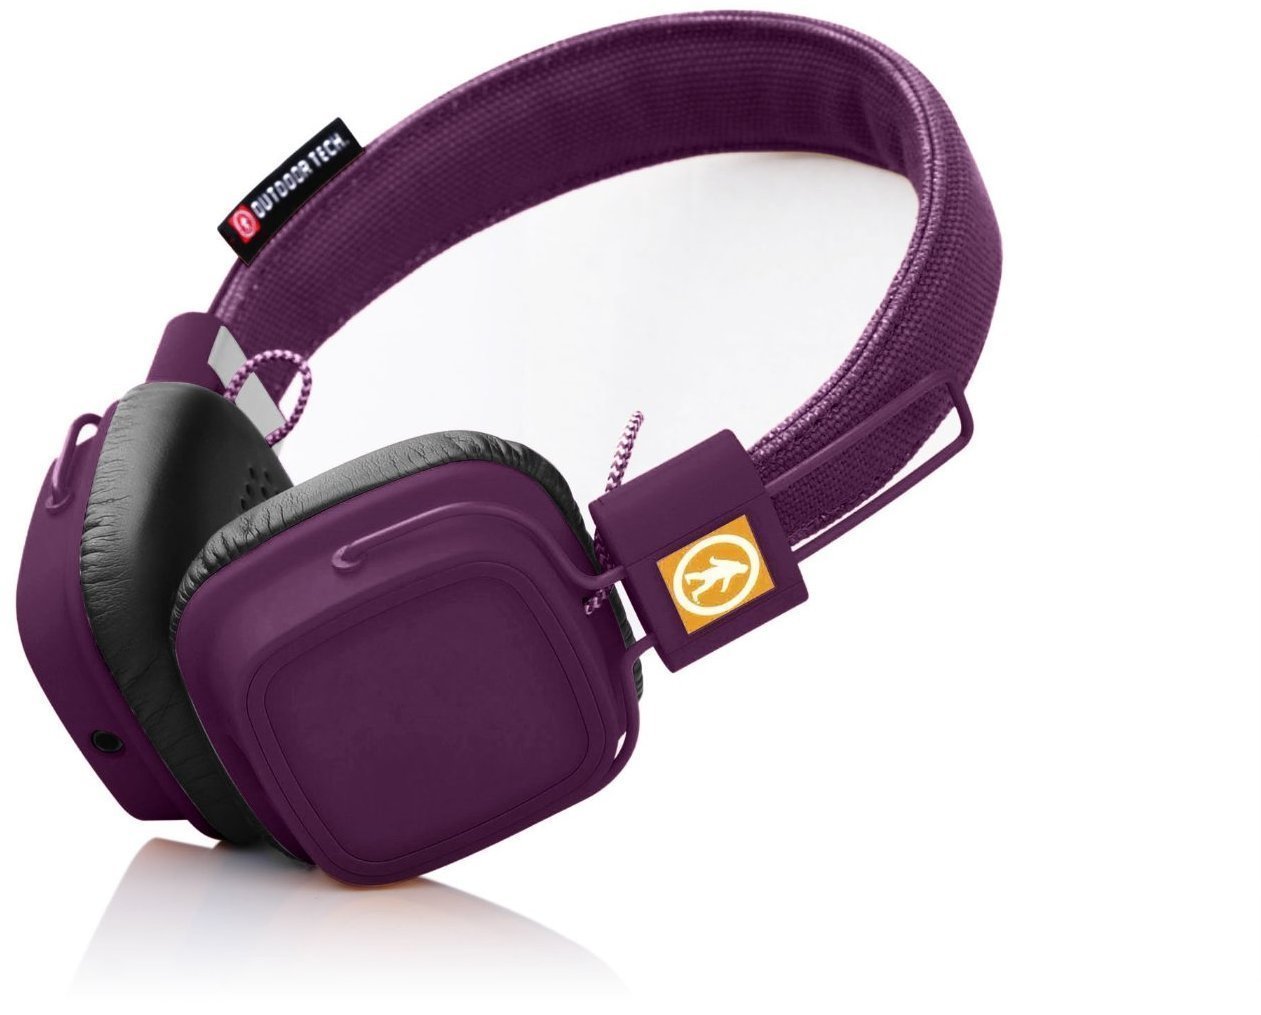 Cuffie Wireless On-ear Outdoor Tech Privates - Wireless Touch Control Headphones - Purplish